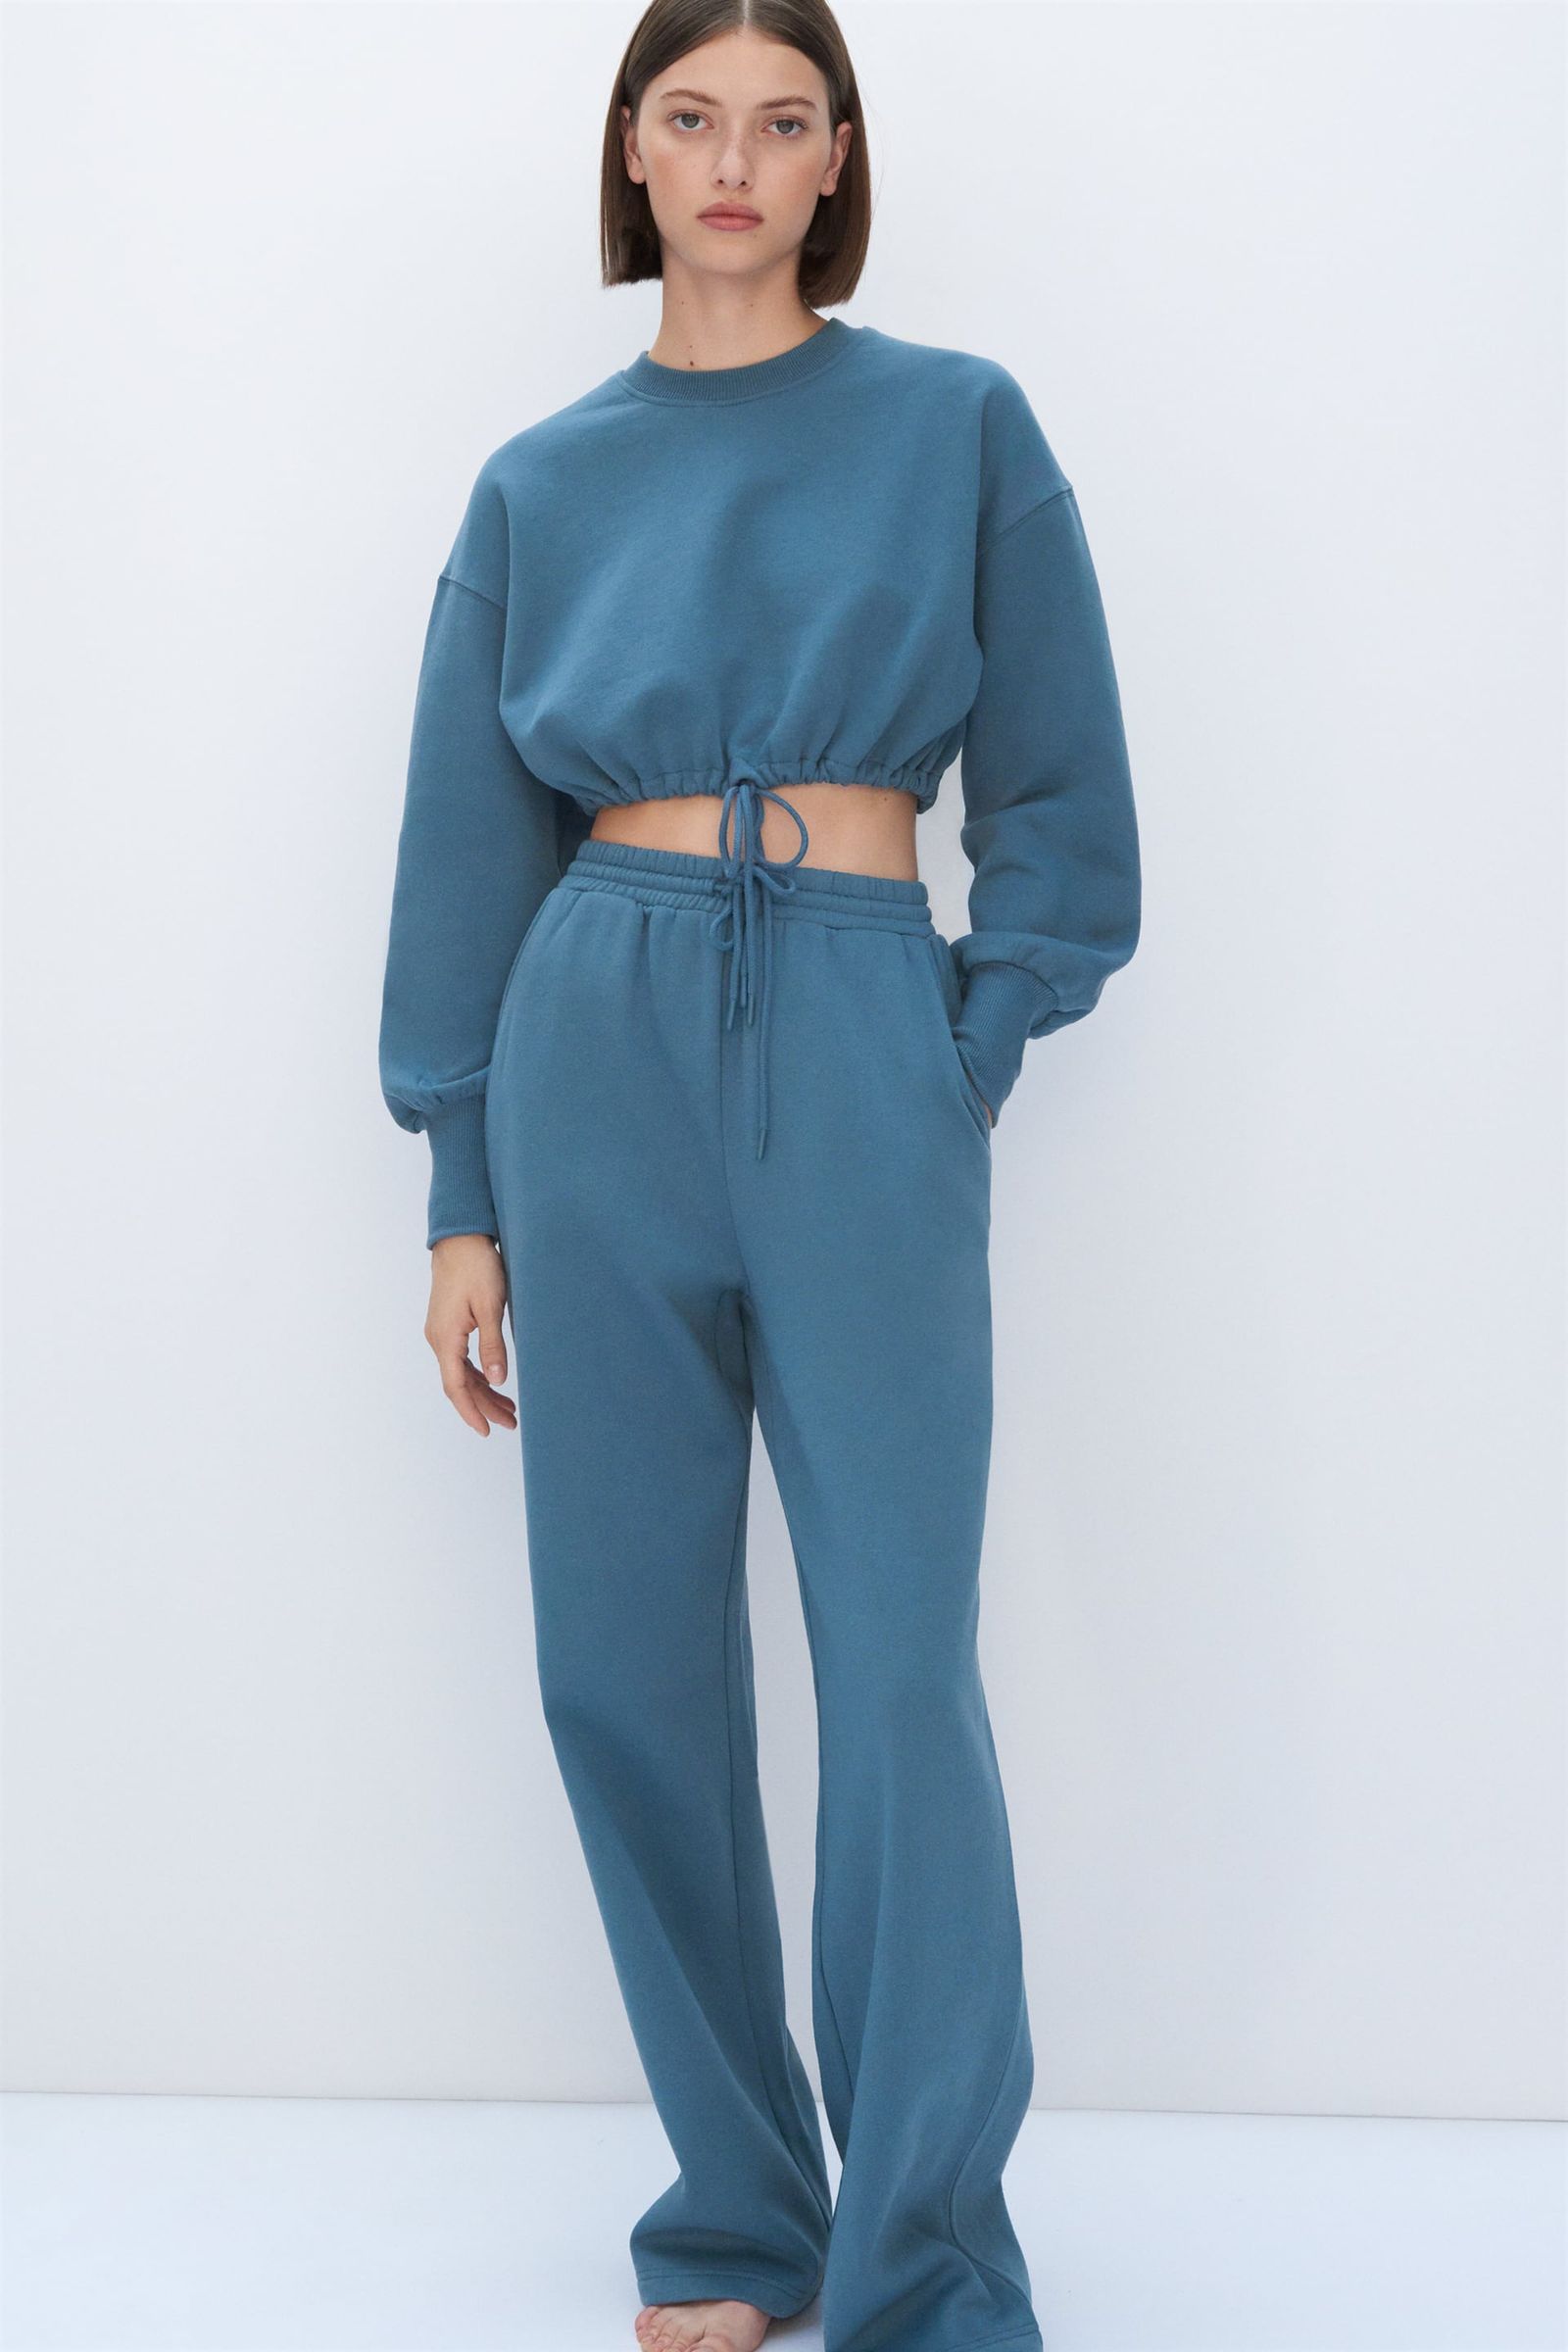 The 29 Best Loungewear Pieces at Zara That Are So Chic | Who What Wear